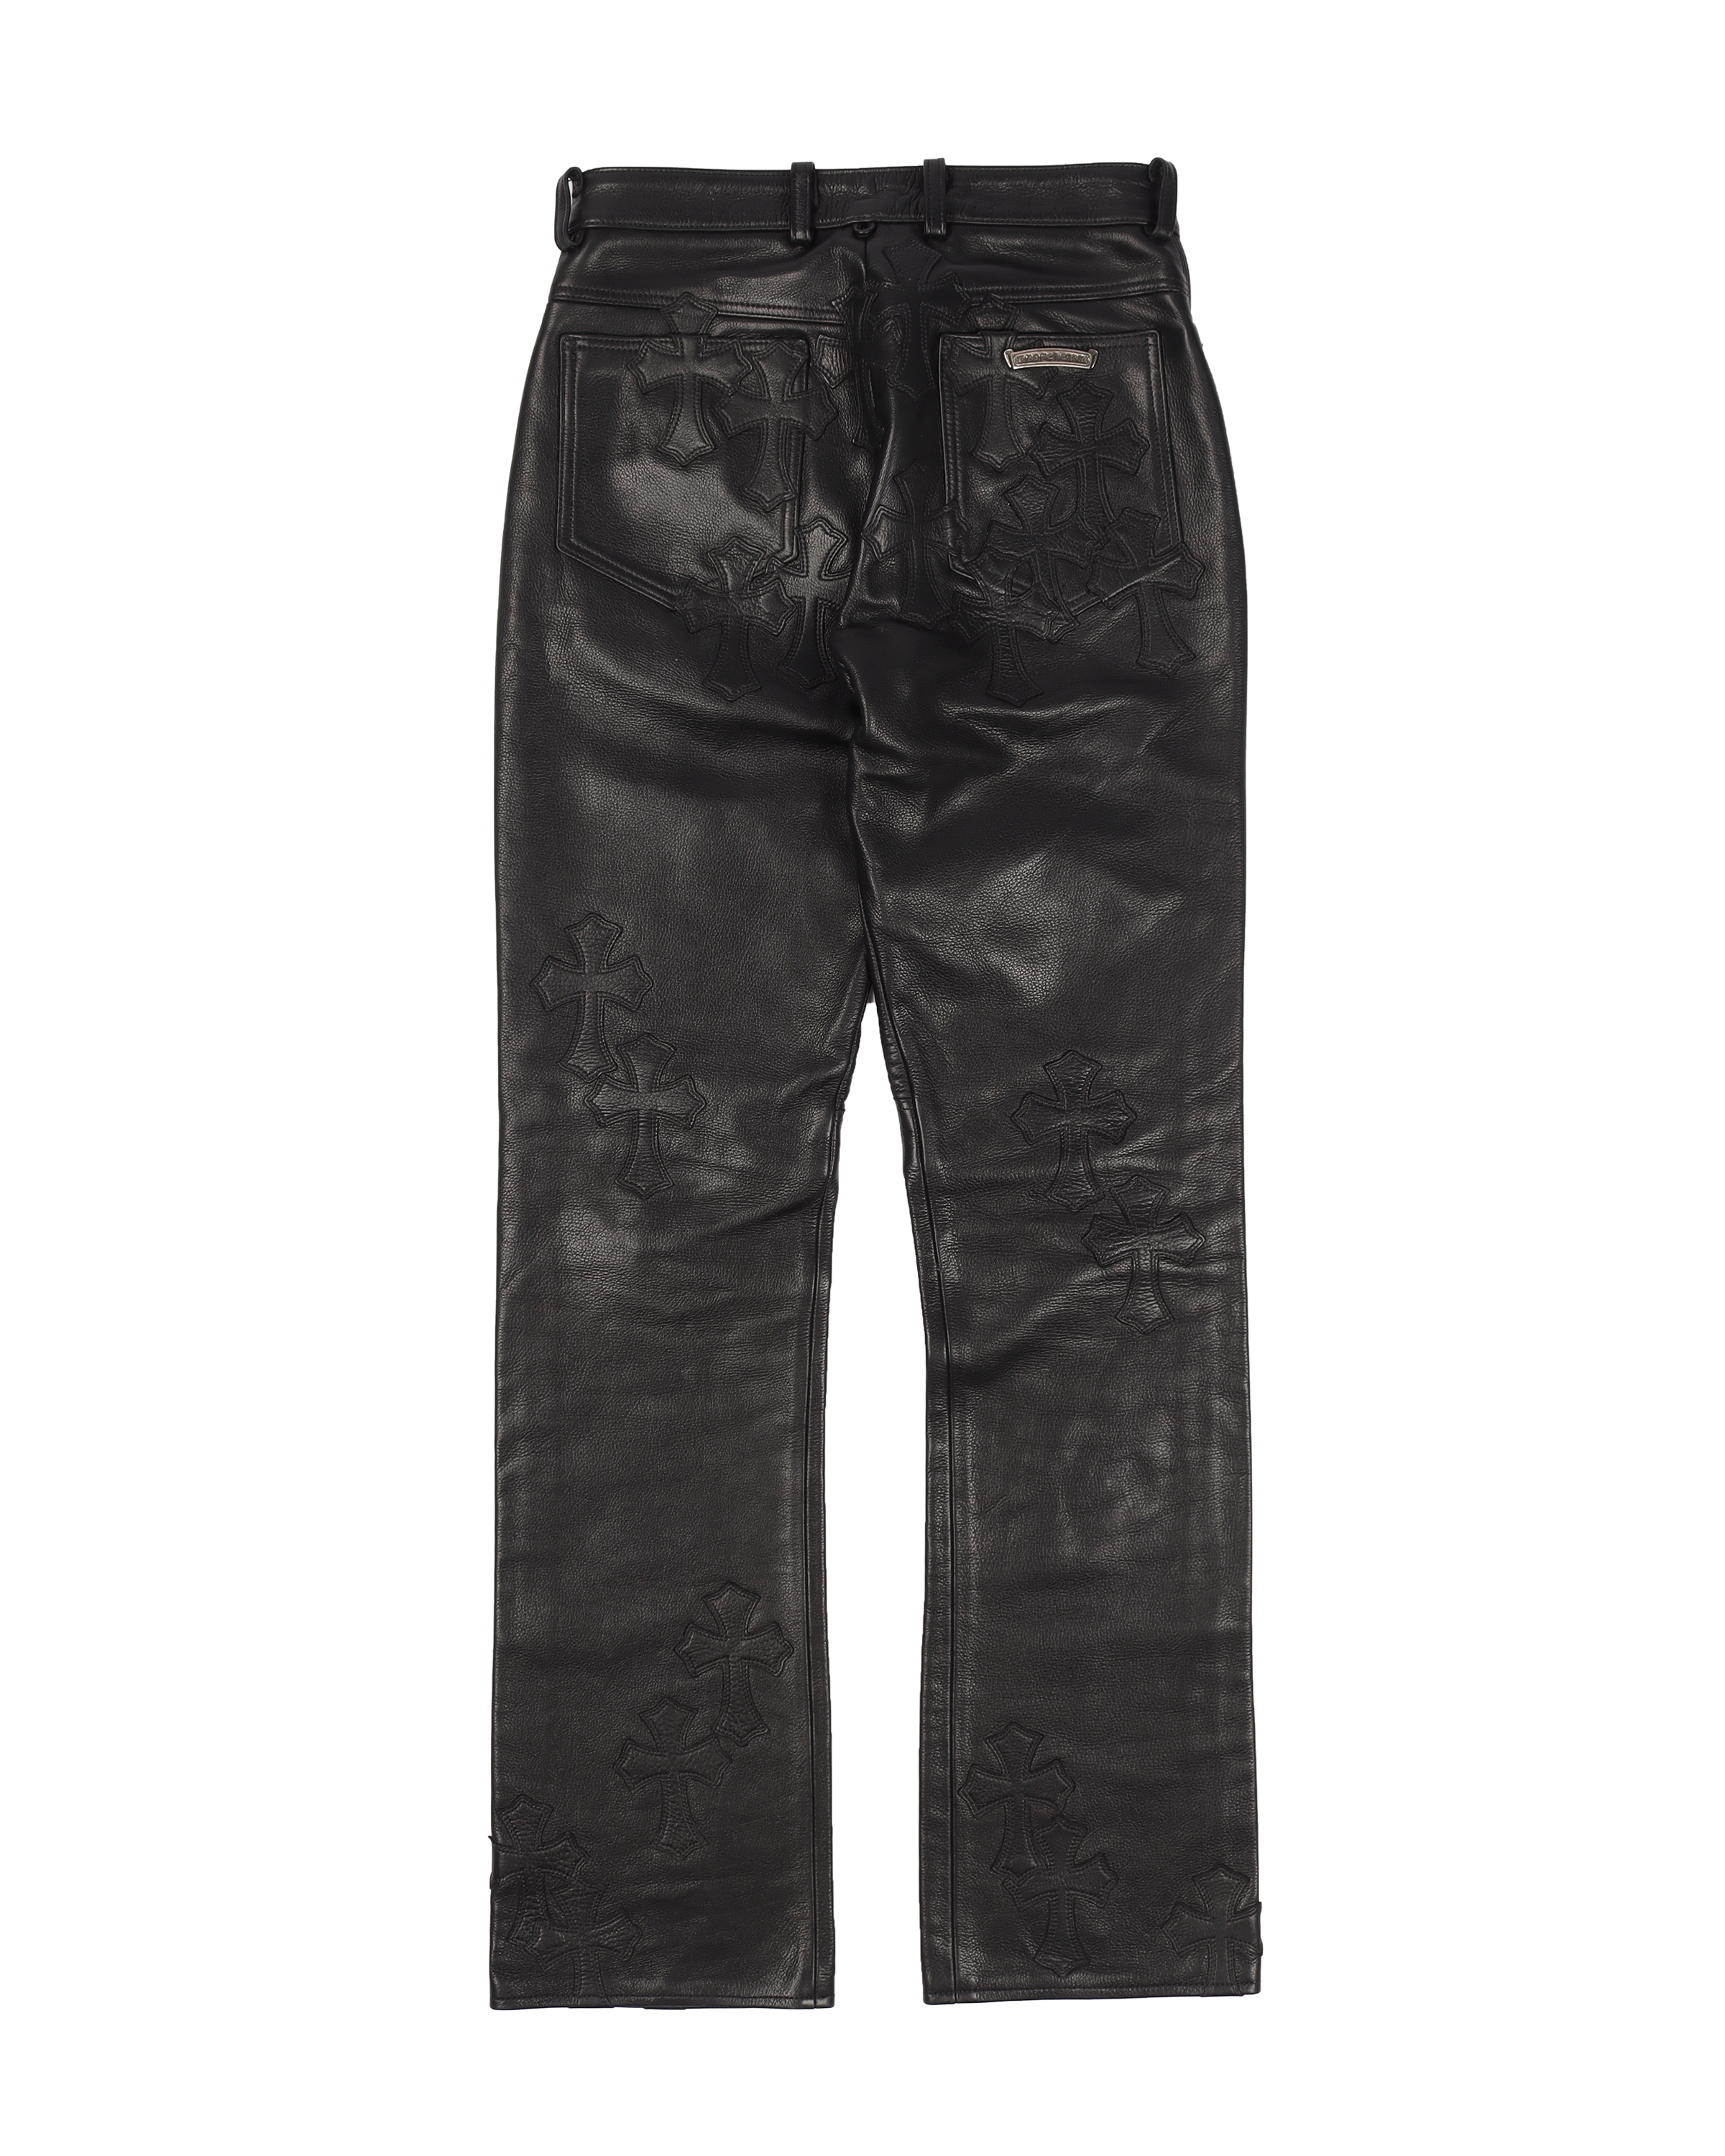 CEMETERY CROSS PATCH LEATHER PANTS